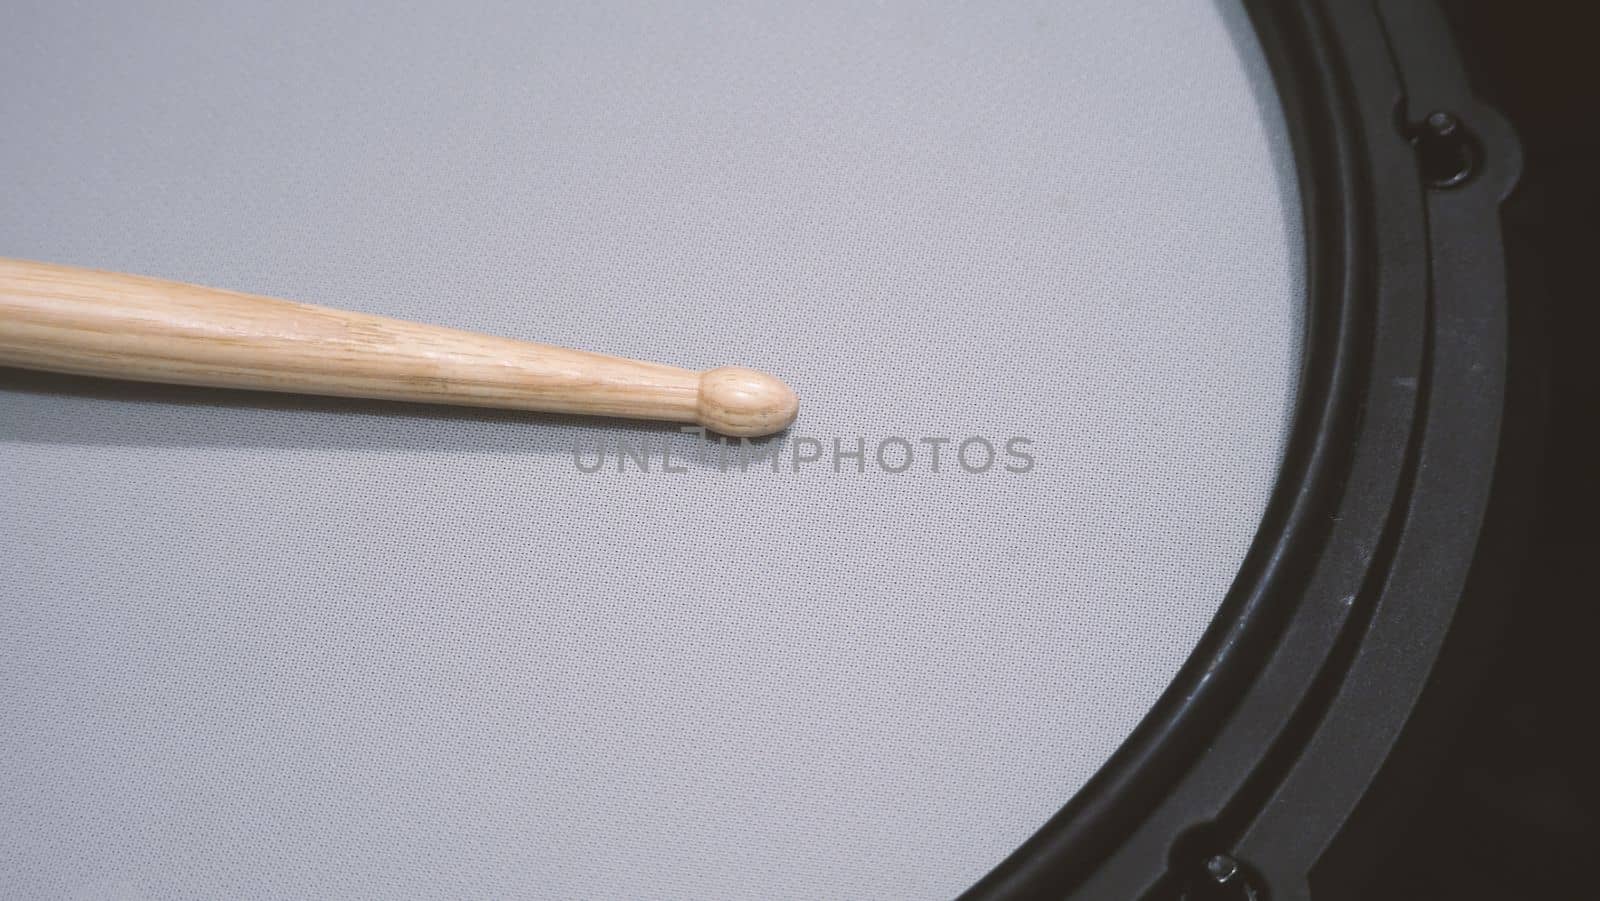 Close-up images of drumsticks on electronic drum snare pad  by gnepphoto